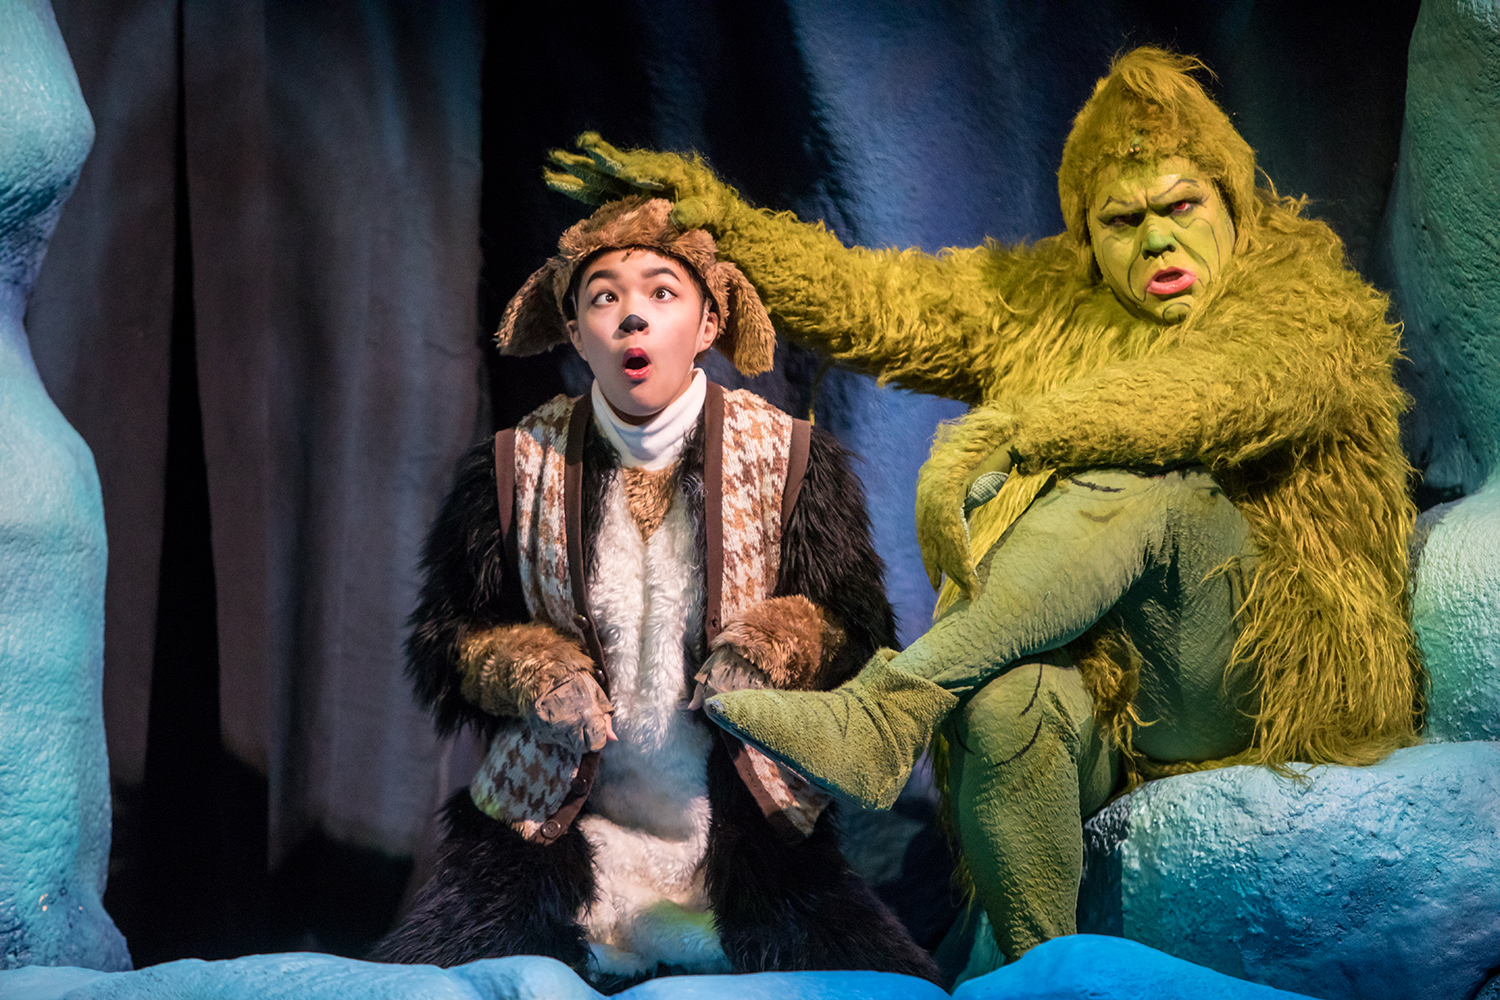 Natalie  Tran  (Young  Max)  and  Reed  Sigmund  (The  Grinch)  in  Dr.  Seuss’s  How  The  Grinch  Stole  Christmas  |  Photo  by  Dan  Norman